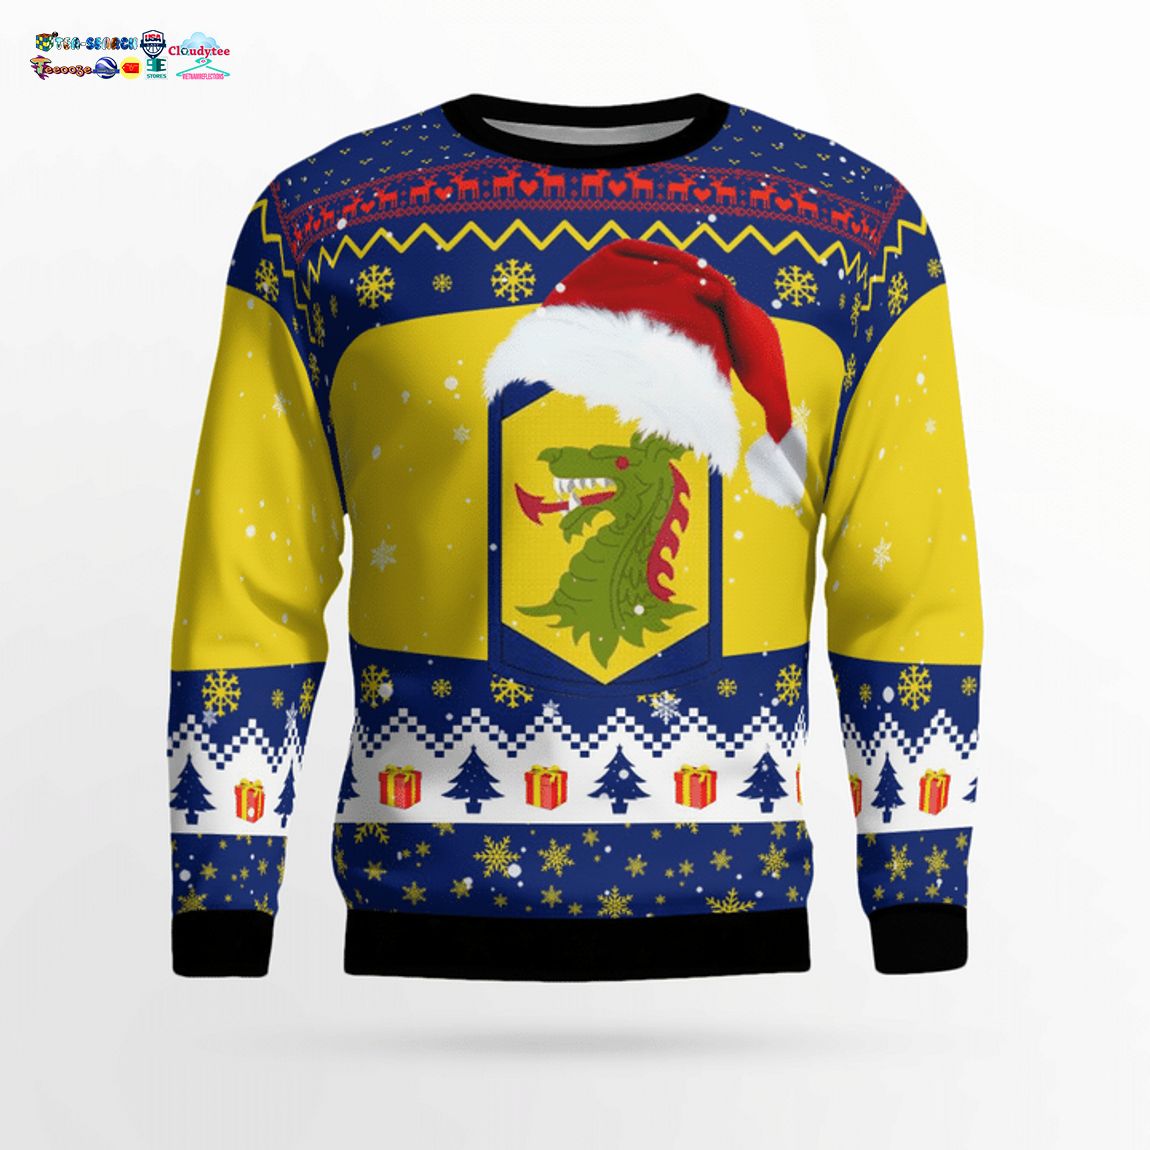 404th Maneuver Enhancement Brigade Of Illinois Army National Guard Ver 1 3D Christmas Sweater